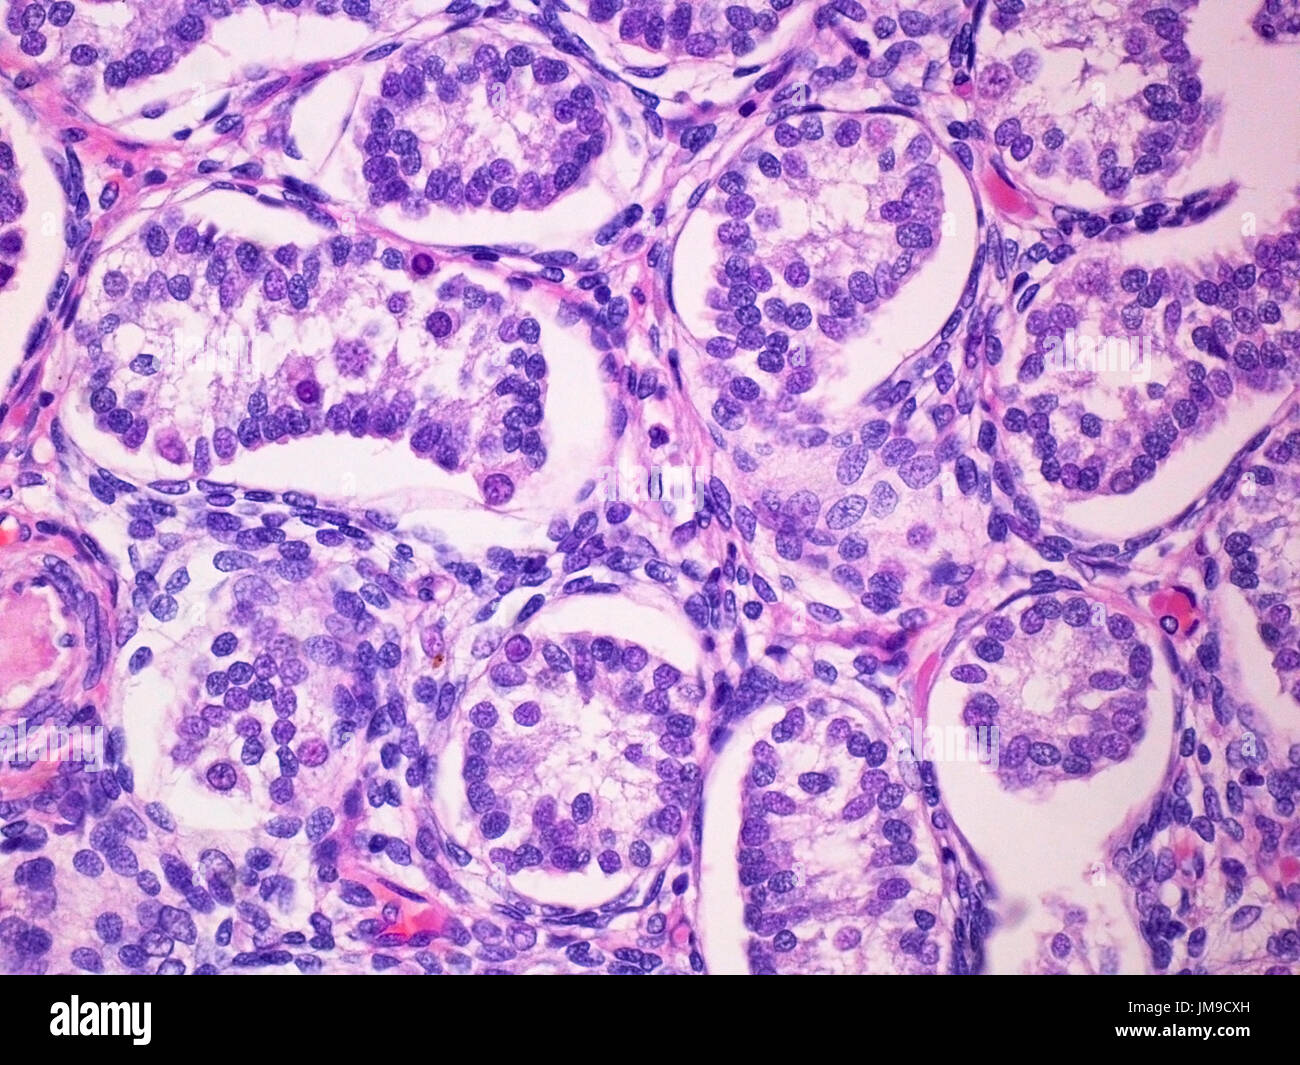 Seminiferous Tubules of a Prepubertal Male Child Testicle Viewed at 400x Magnification with Haemotoxylin and Eosin Staining. Stock Photo